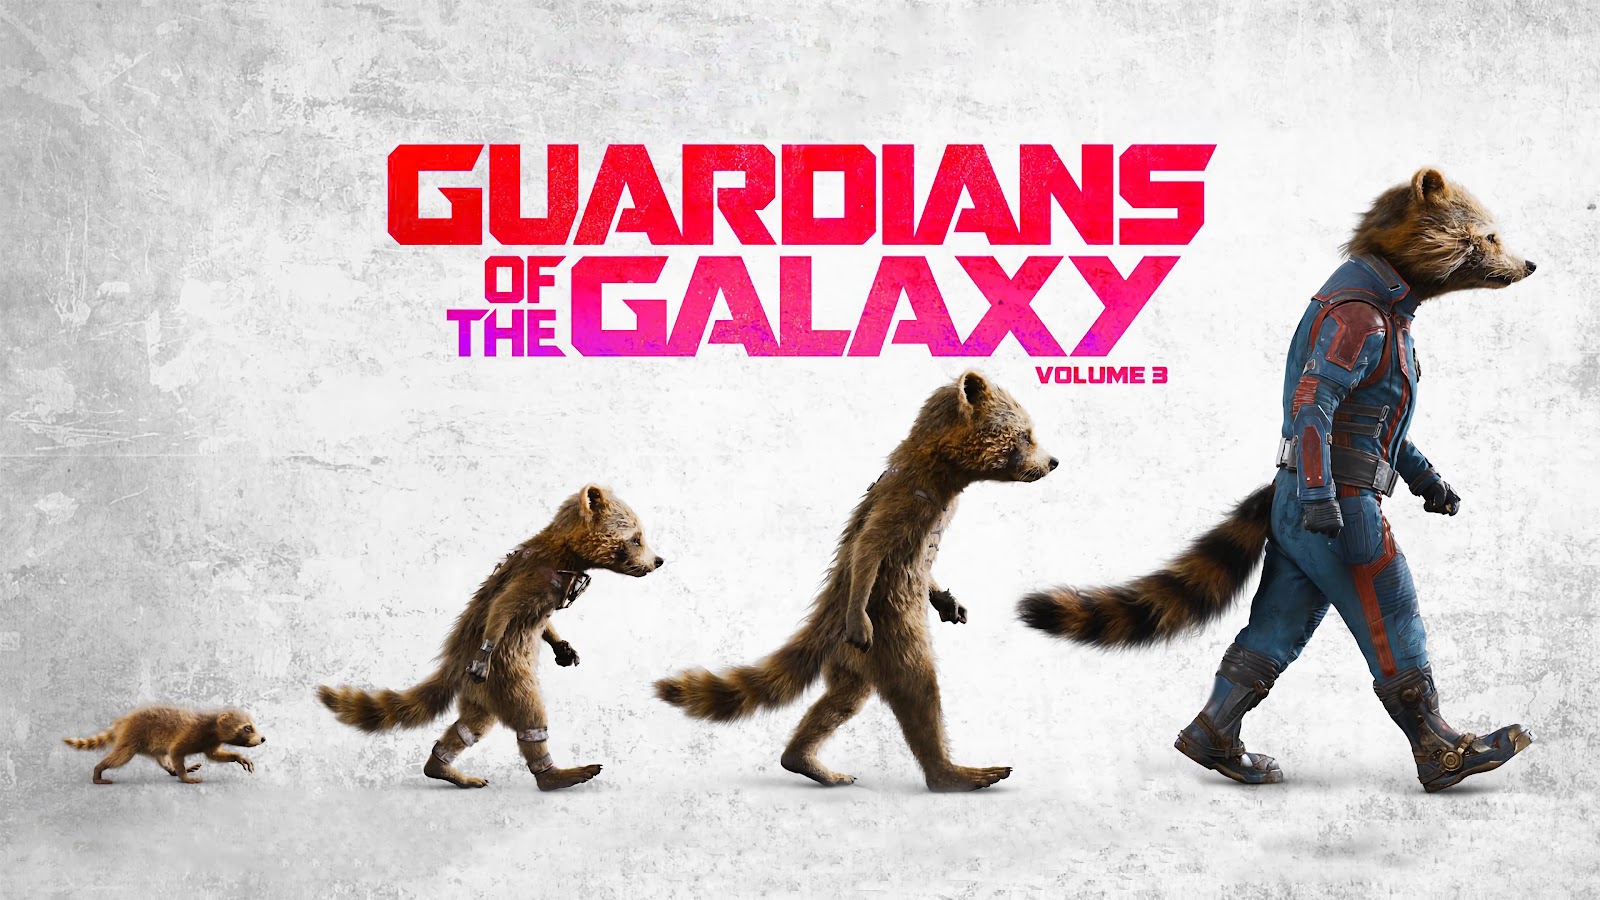 Raccoon Evolution: Guardians of the Galaxy vol. 3 POSTER 4K Wallpaper for PC